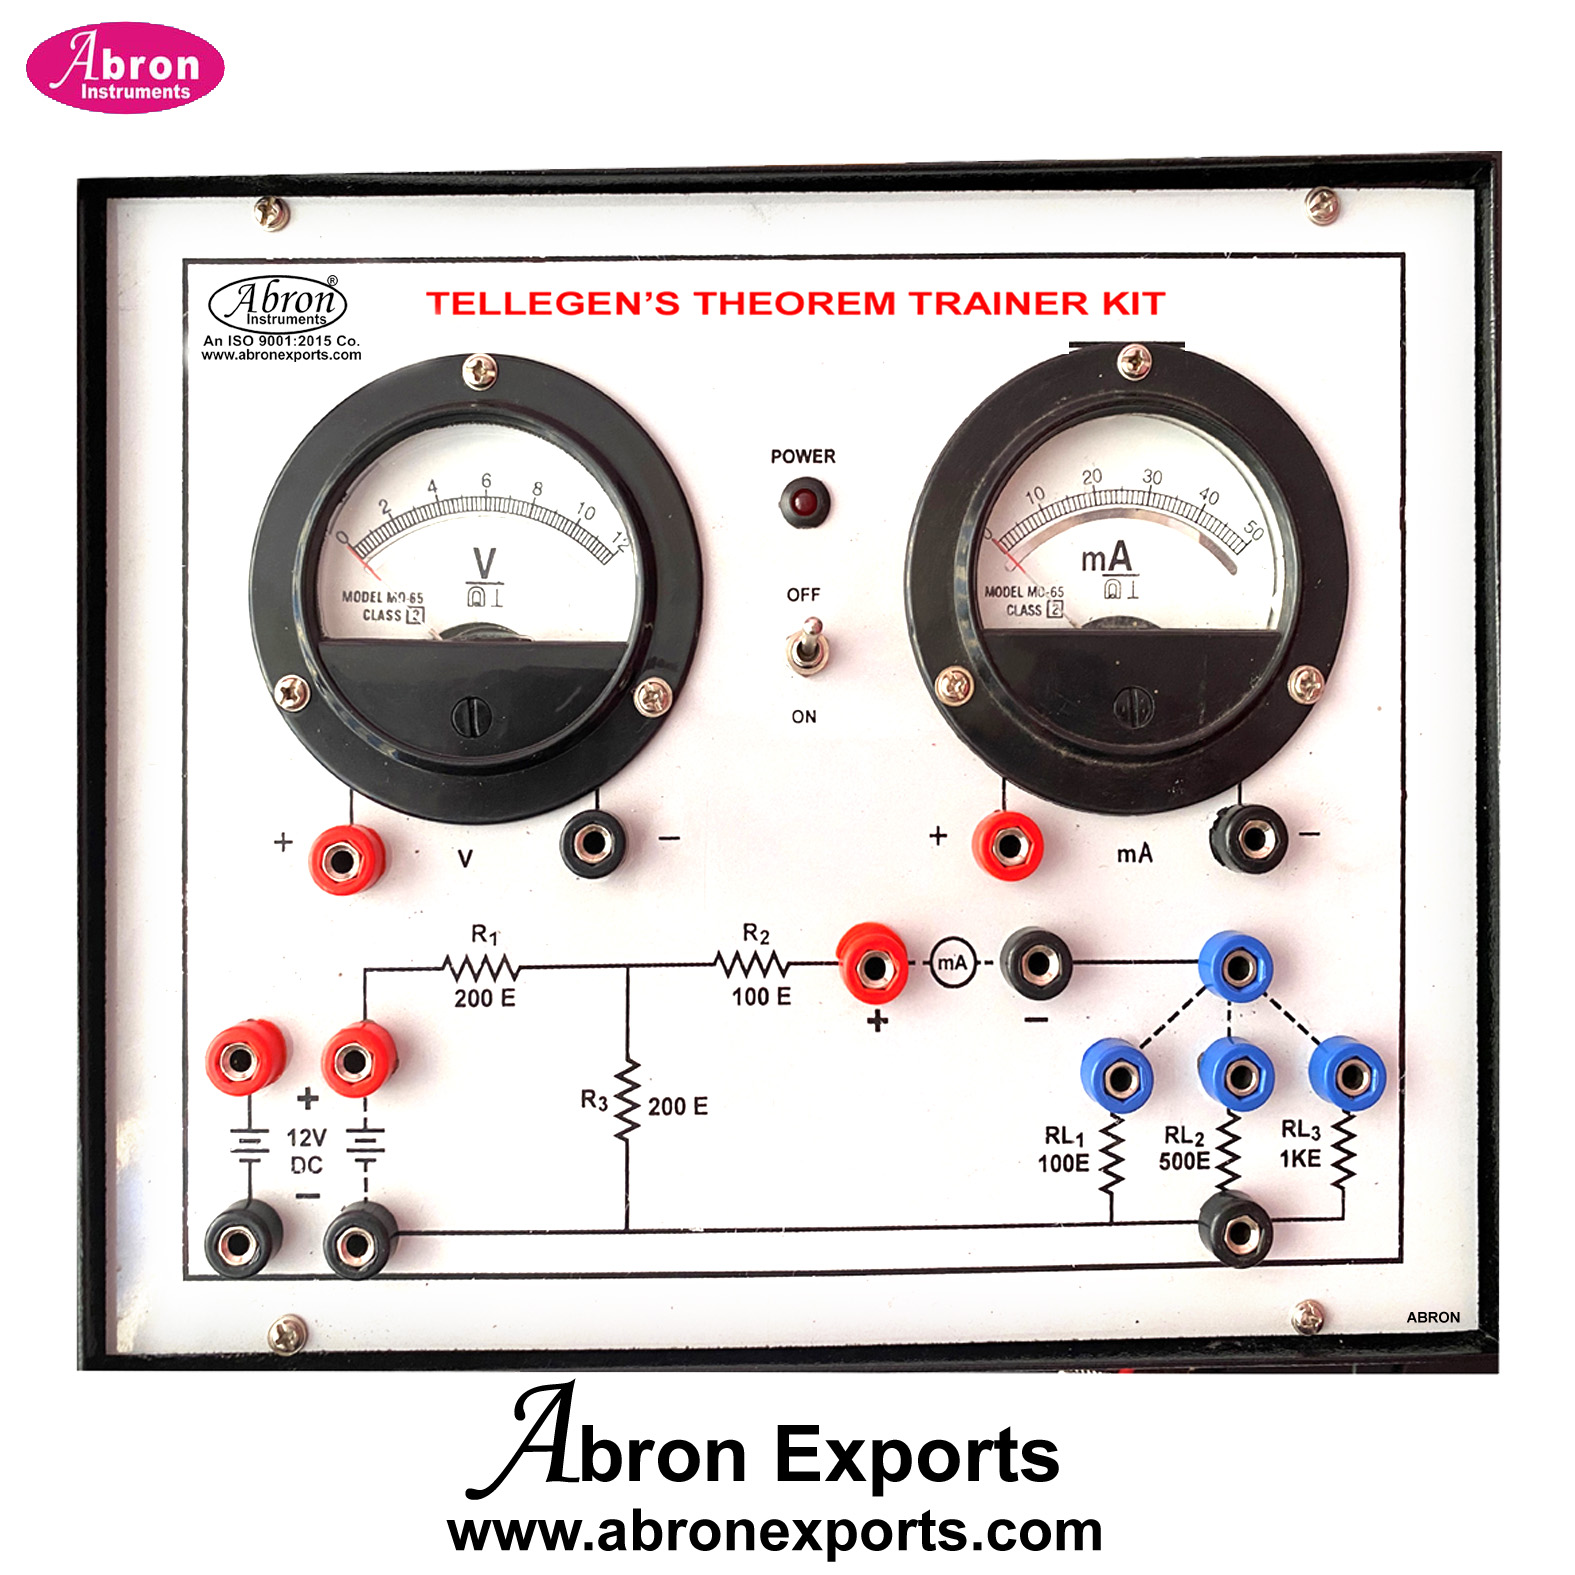 Study Theorem Maximum Power Transfer Network Theorem With Power Supply 2 Meters Electronic Trainer Kit Abron AE-1430MP 